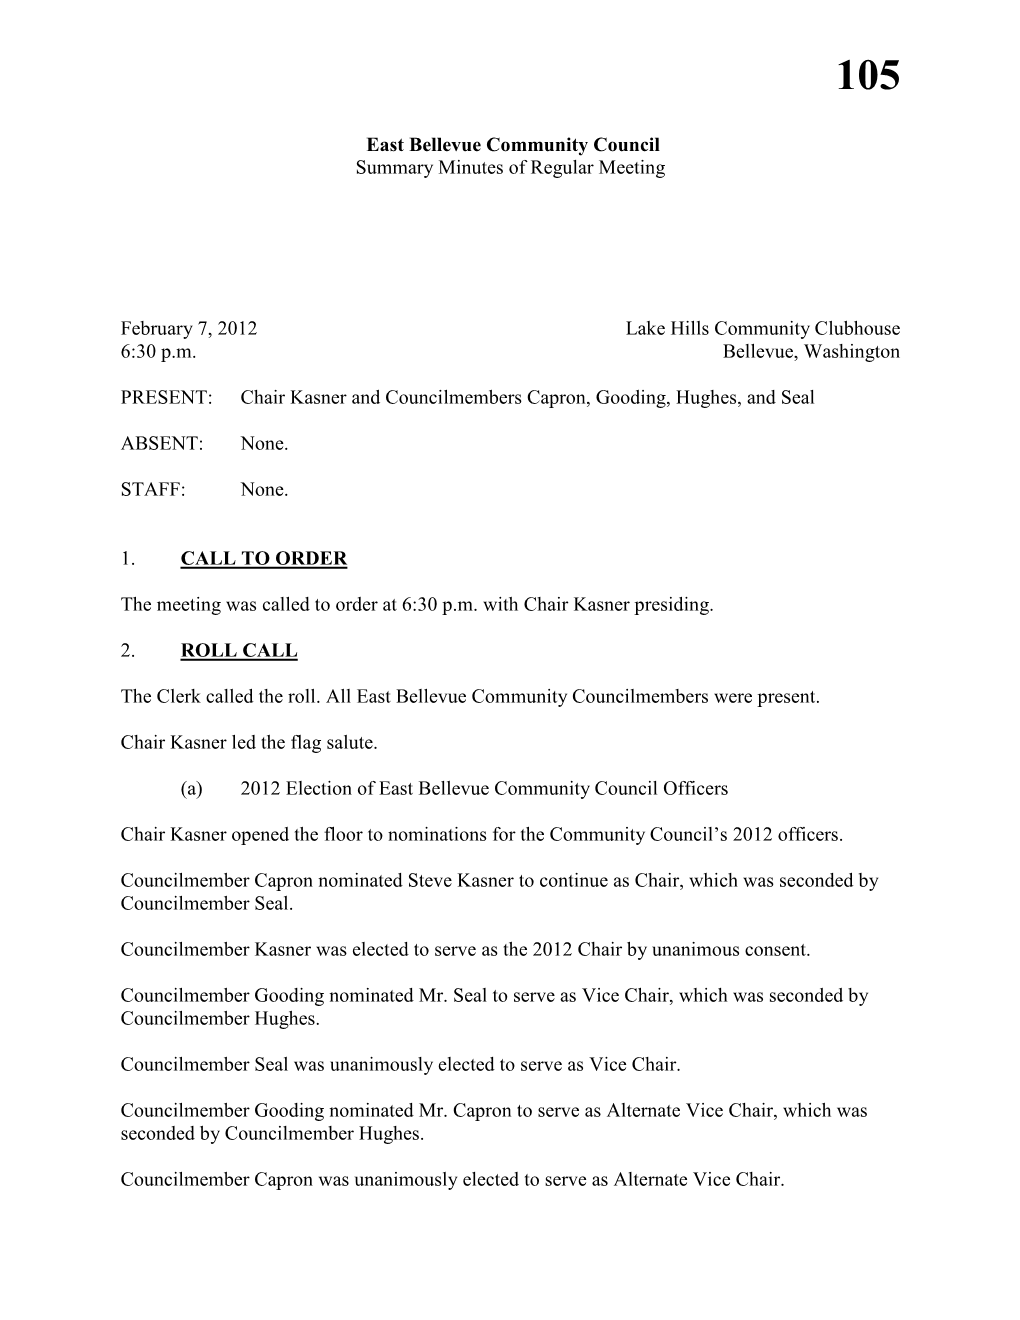 East Bellevue Community Council Summary Minutes of Regular Meeting